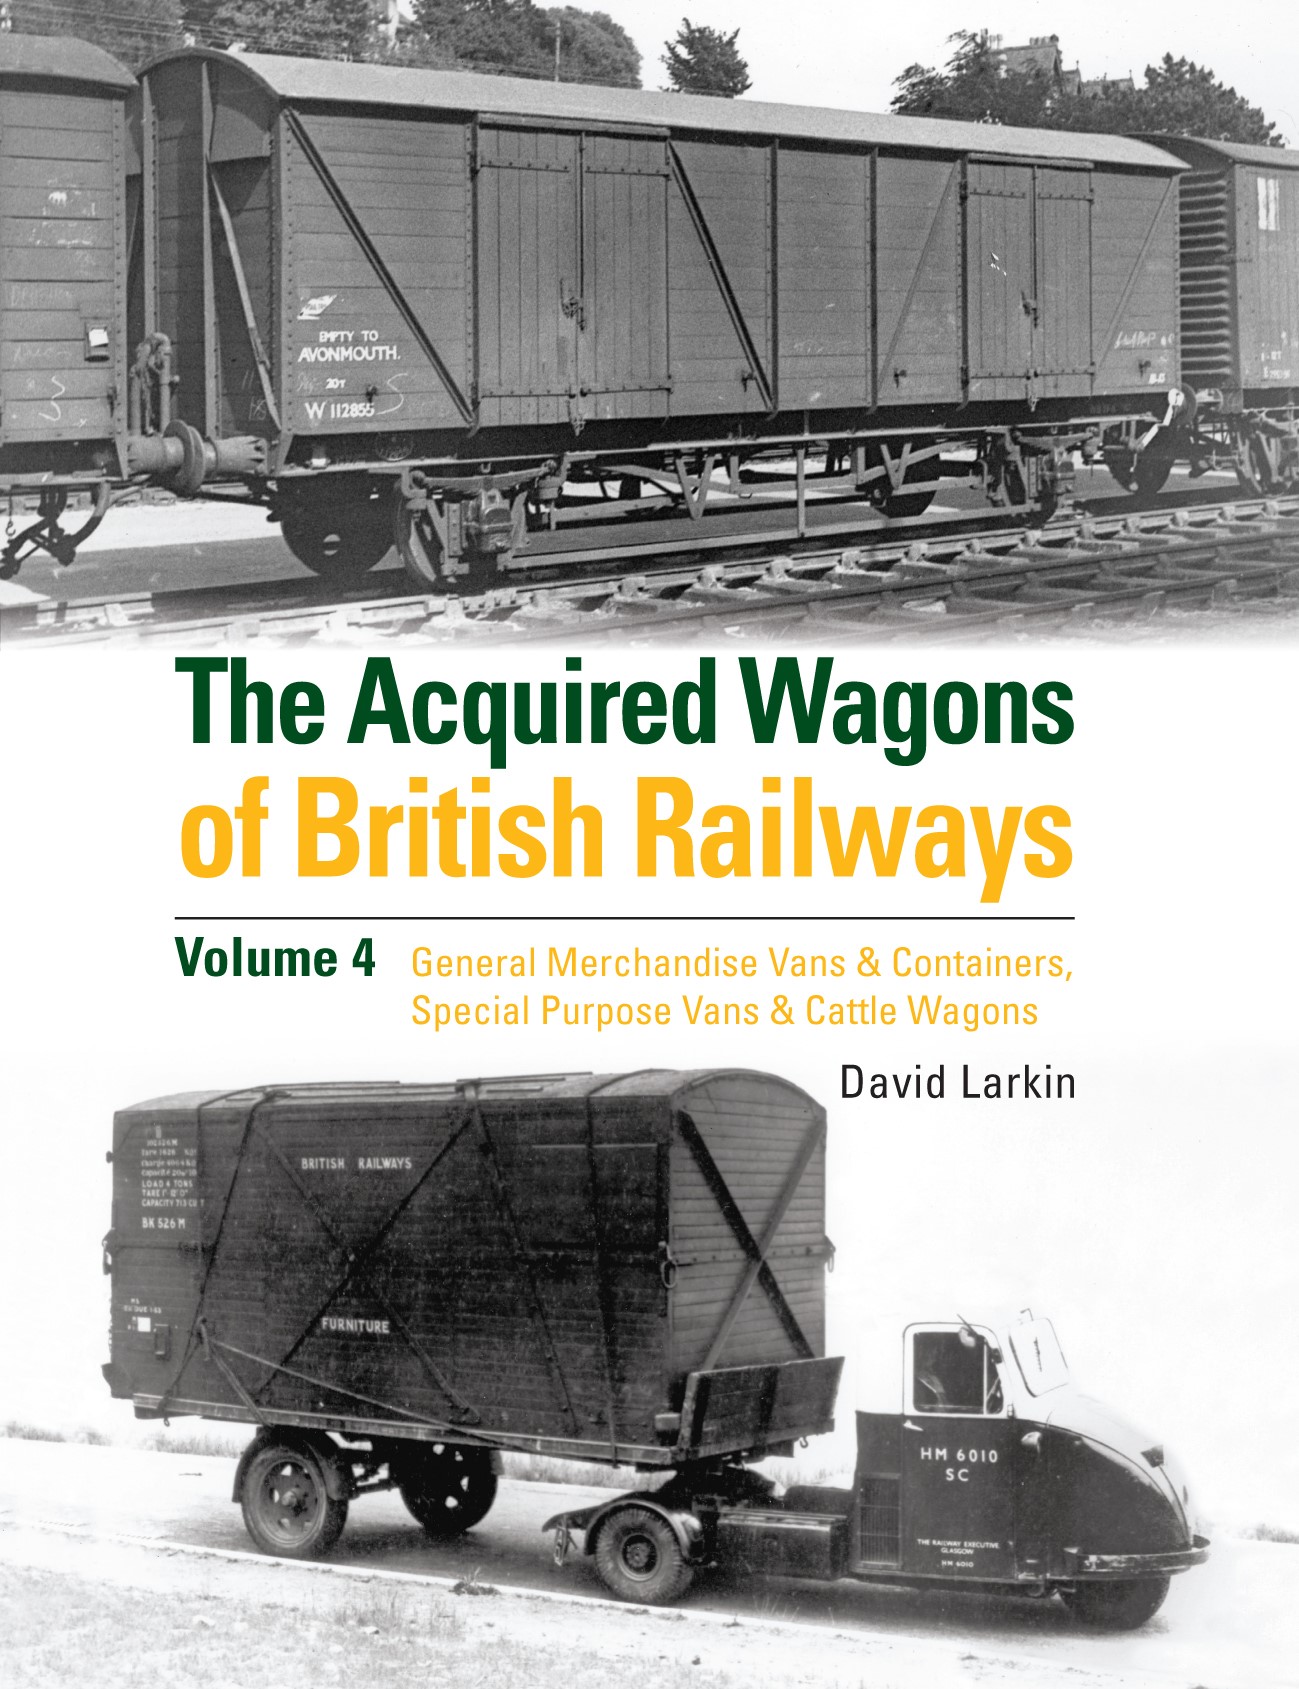 The Acquired Wagons of British Railways Volume 4; General Merchandise Vans & Containers, Special Purpose Vans & Cattle Wagons